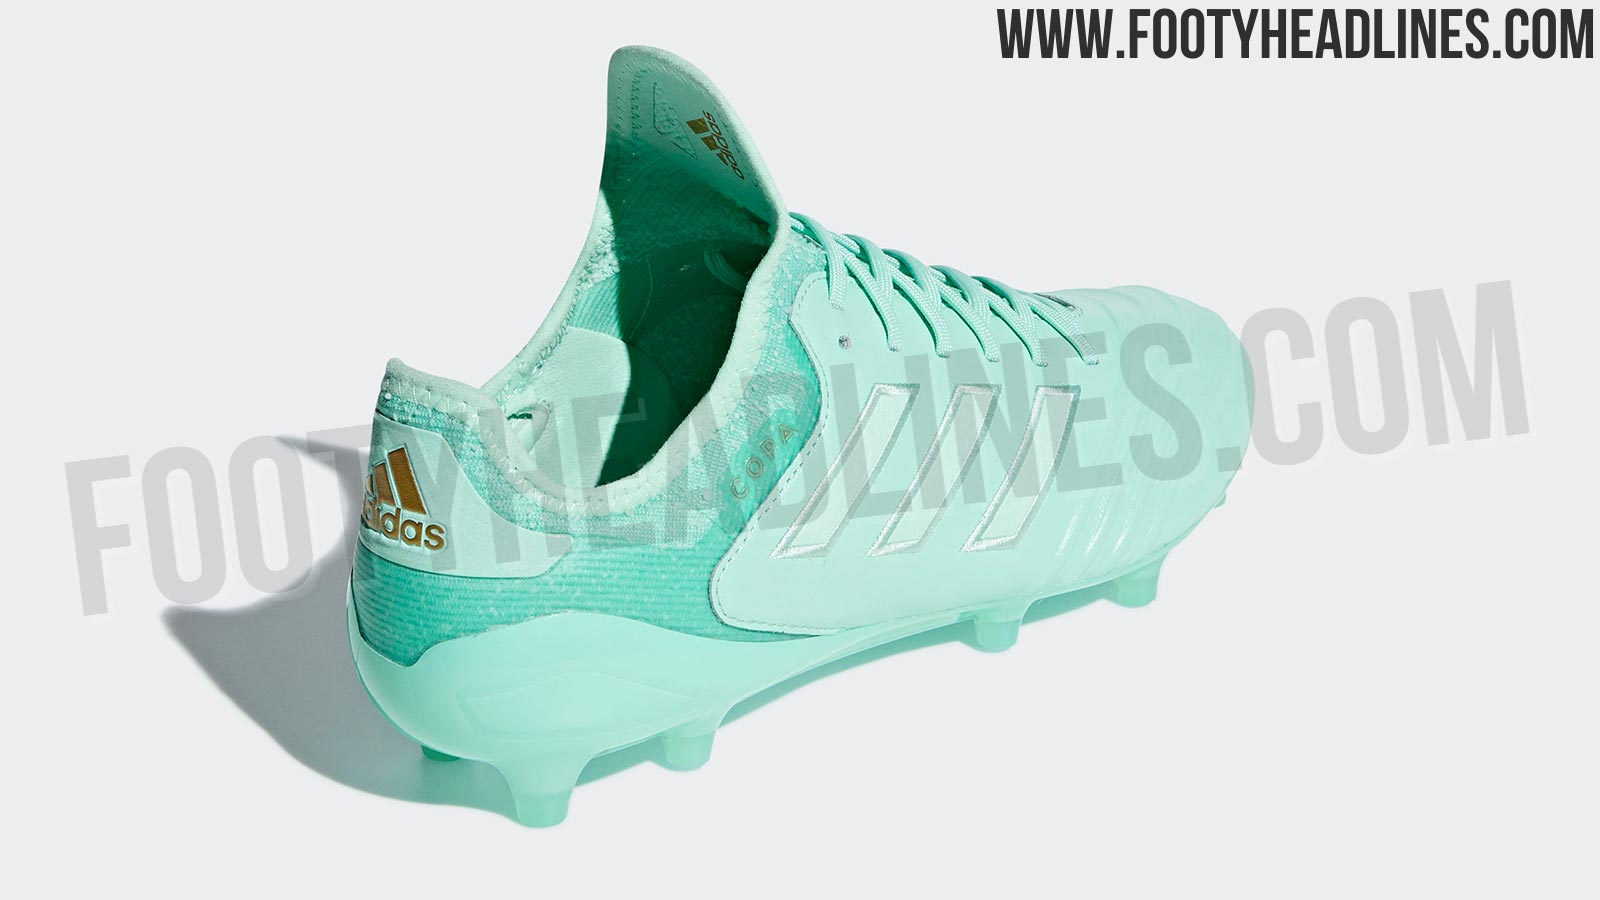 Spectral Adidas Boots Released Footy Headlines